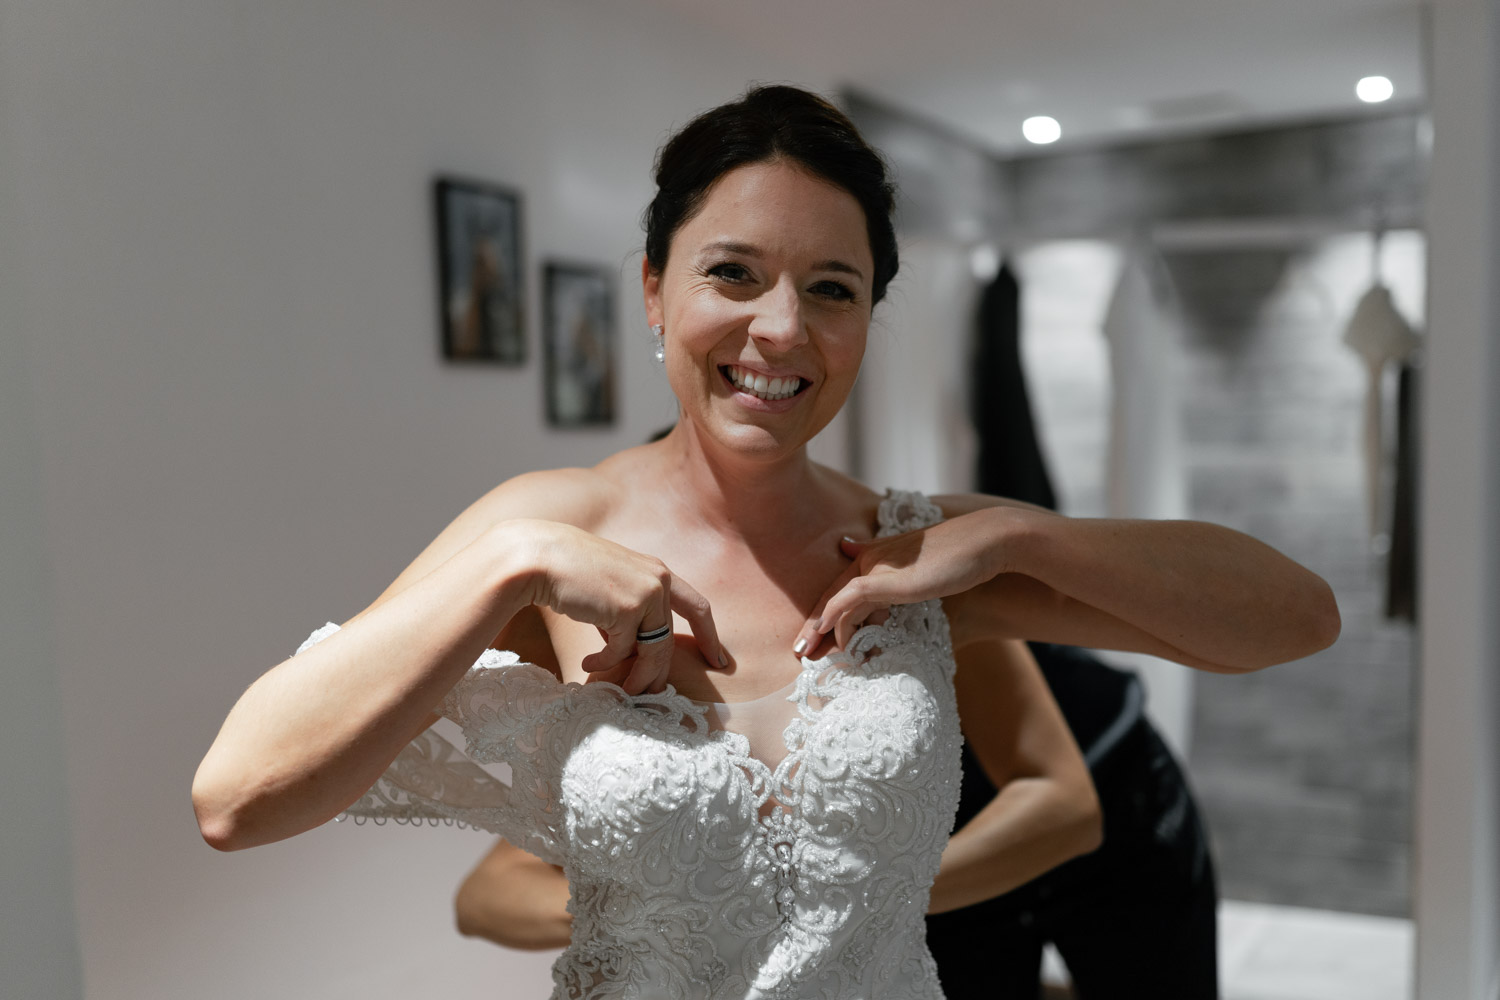 Bride during Getting Ready in Switzerland for a Villa Honegg Wedding